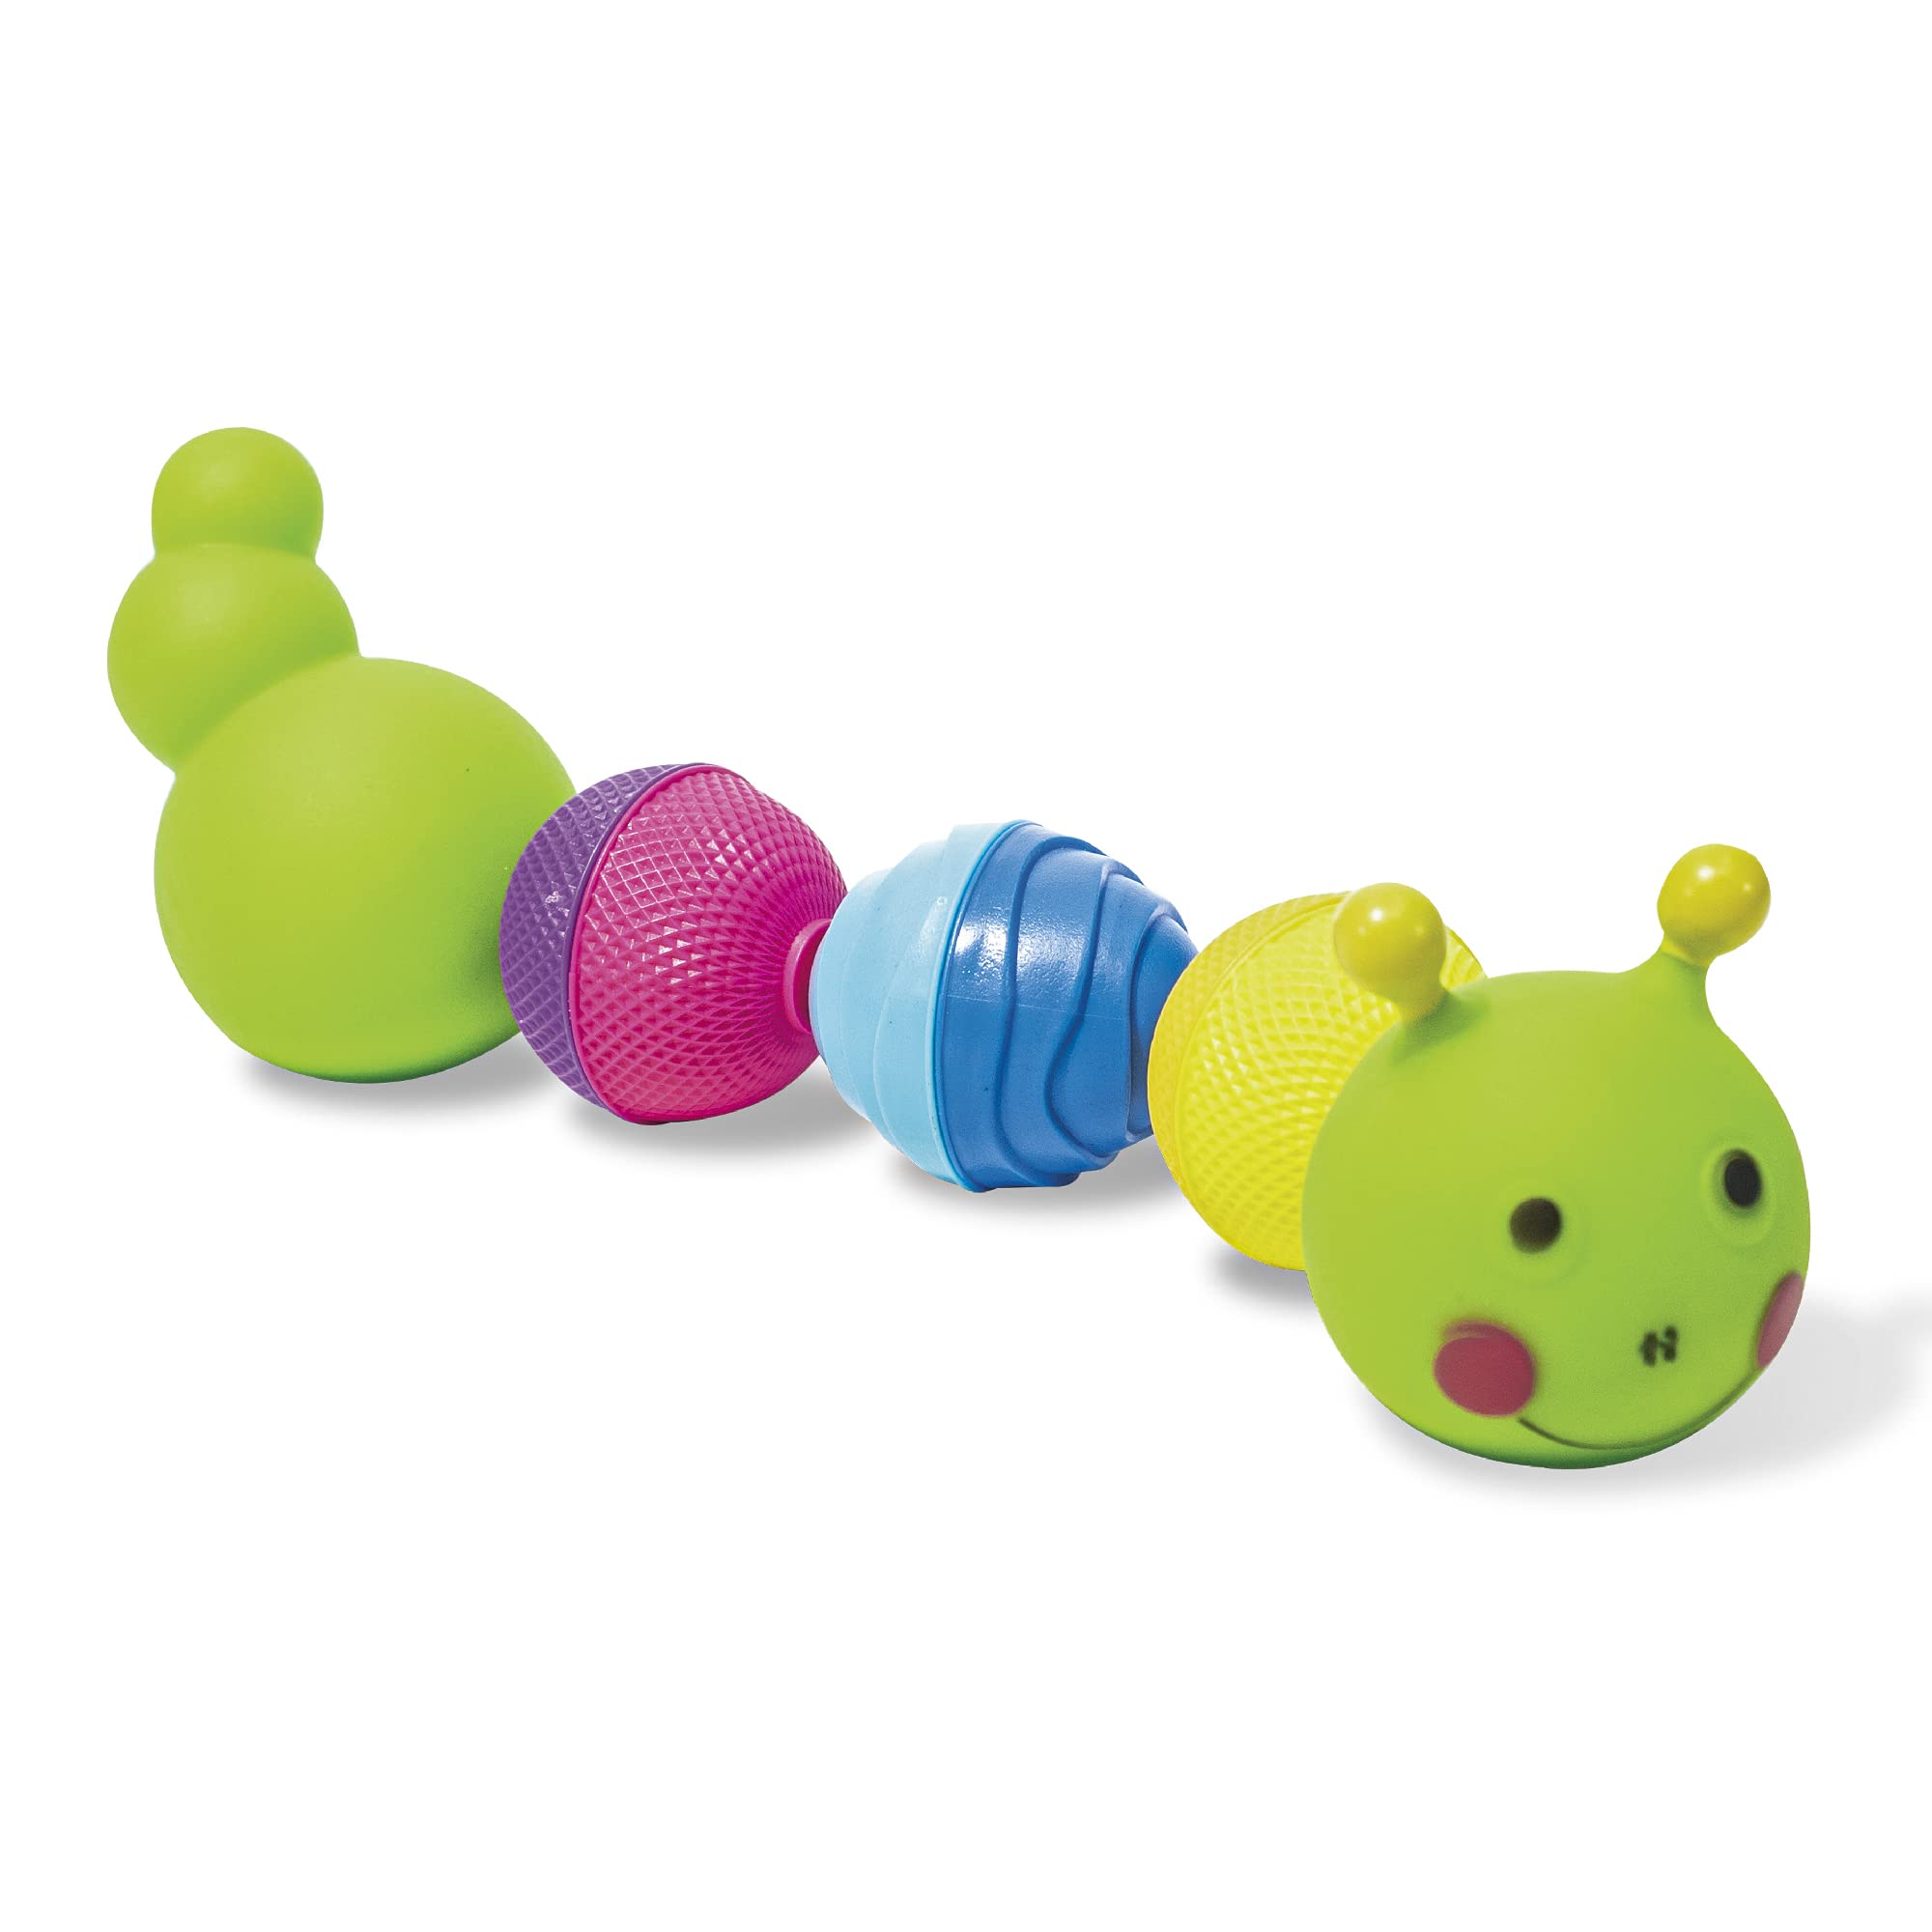 Lalaboom - Bath Toy - Caterpillar and Beads to Assemble - Preschool Toy - Montessori Learning Toy for Babies and Children from 10 Months to 4 Years Old - BL500, 8 Pieces, Multicolor